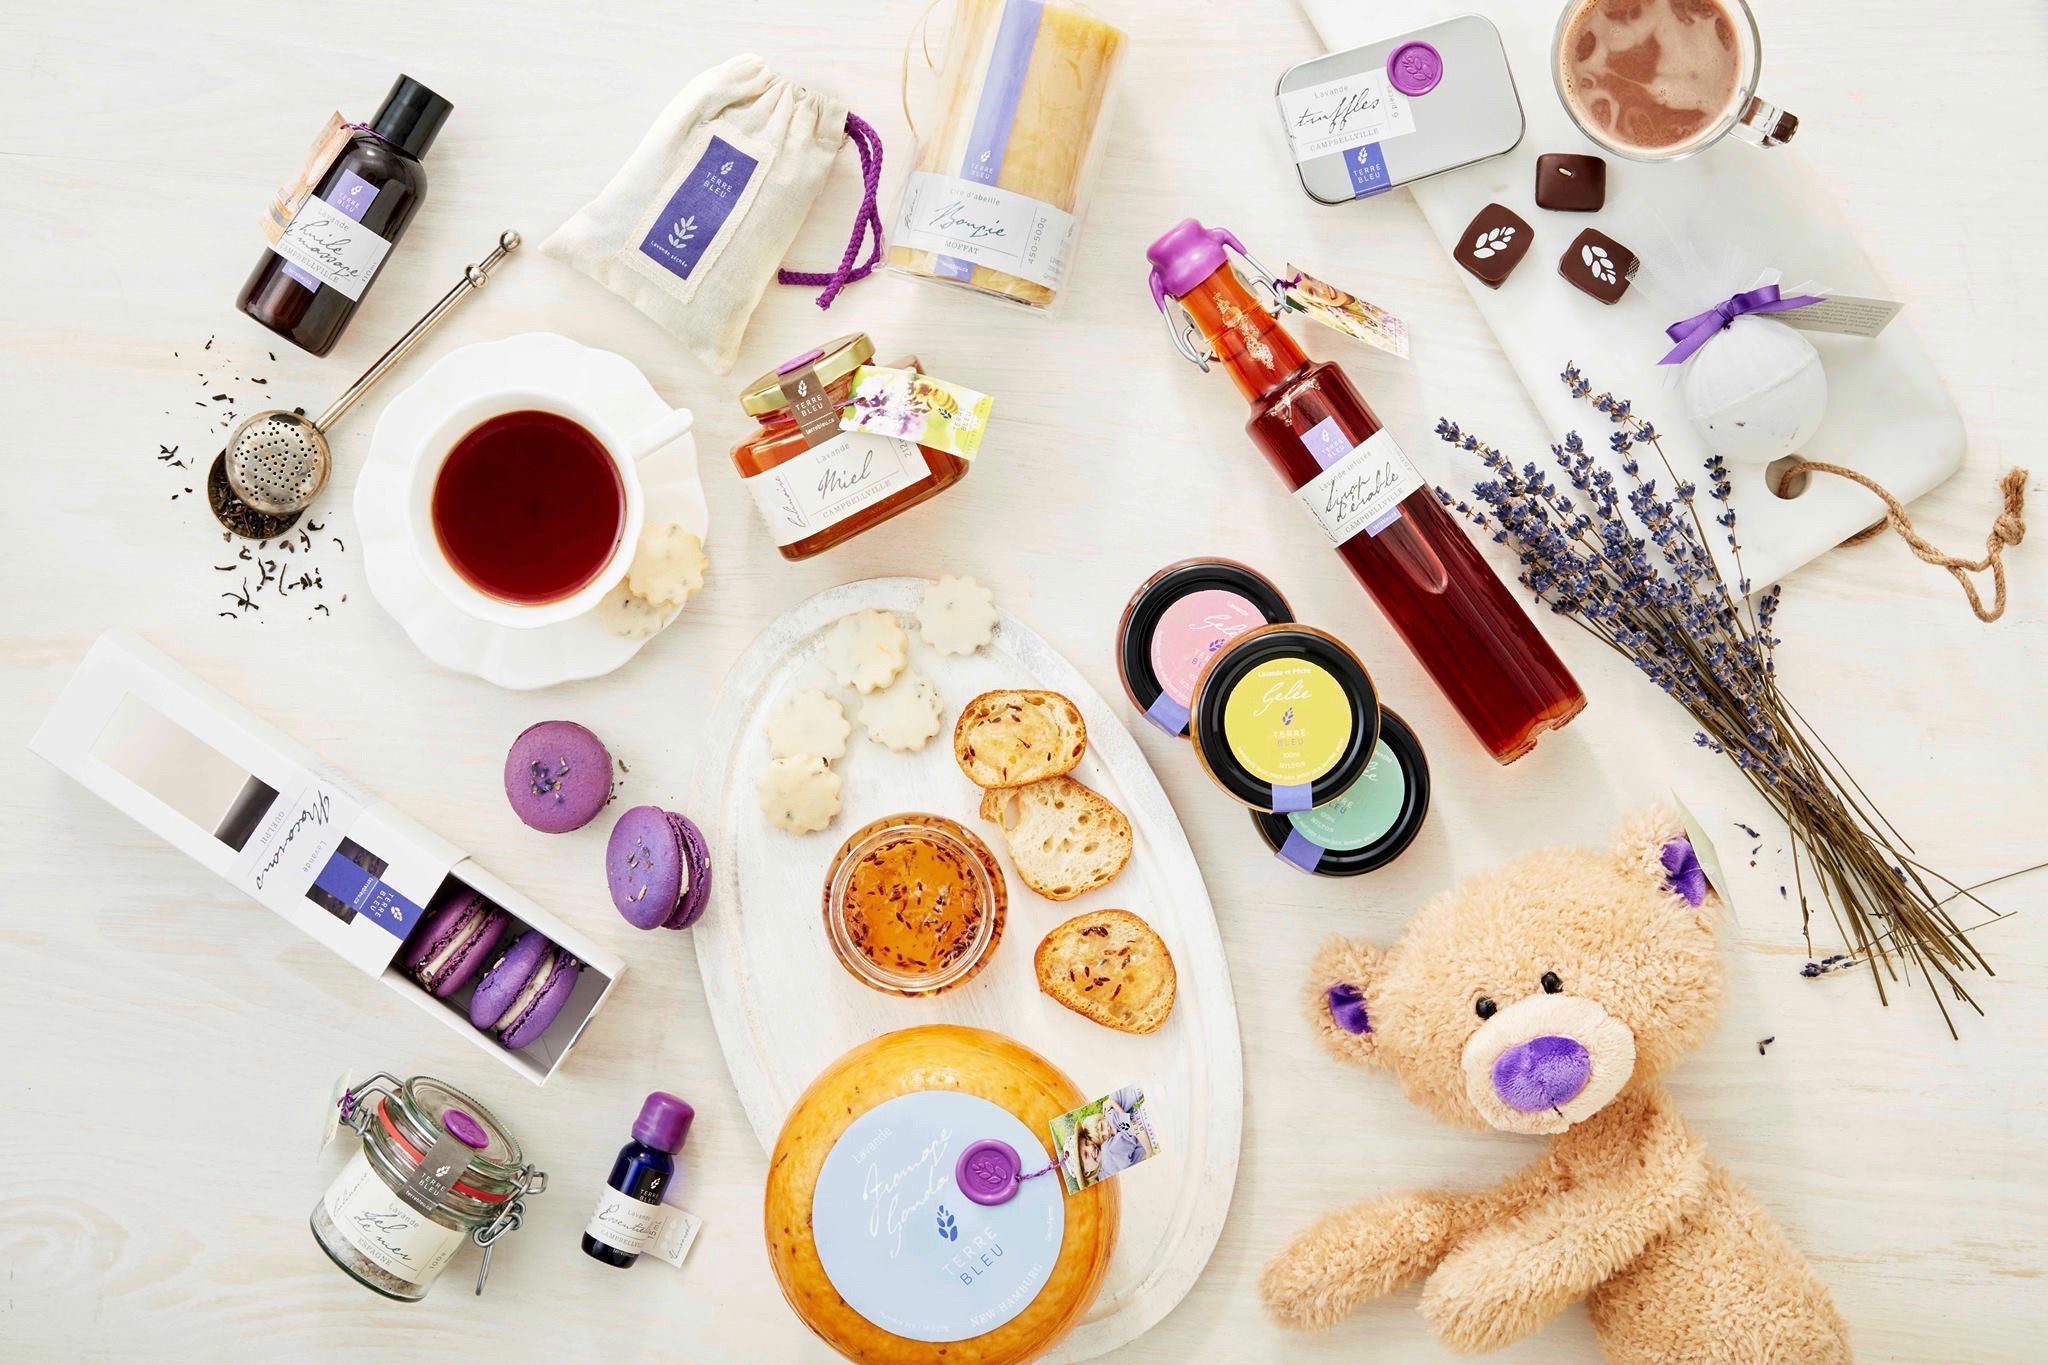 A variety of lavender products from Terre Bleu.